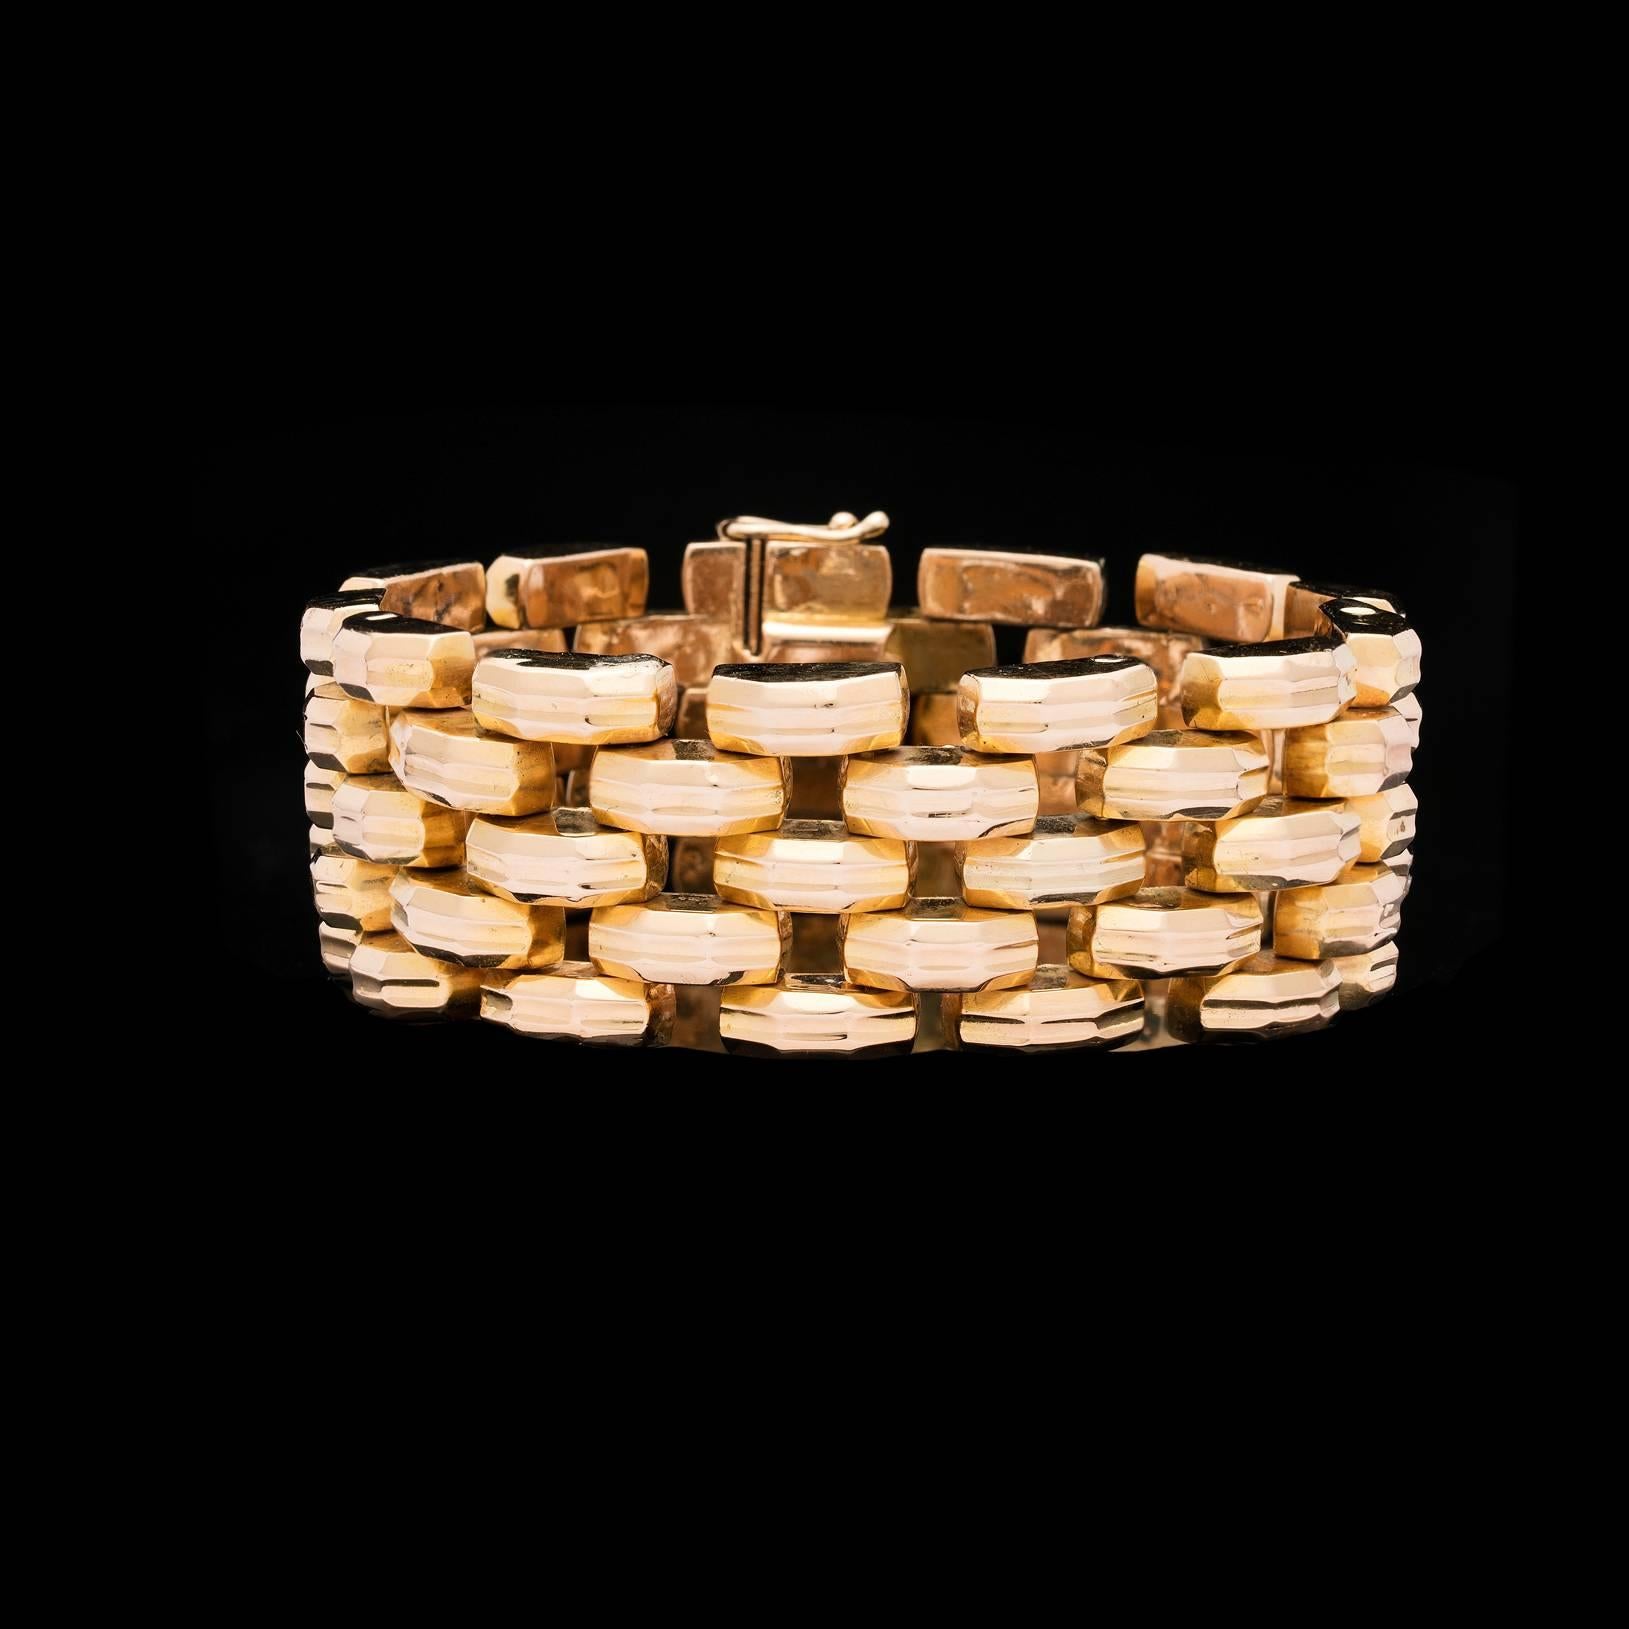 Vintage 18k yellow gold textured 5-row link bracelet measuring 1 inch wide and 8 1/4 inches long.  This piece totals 70.0 grams.